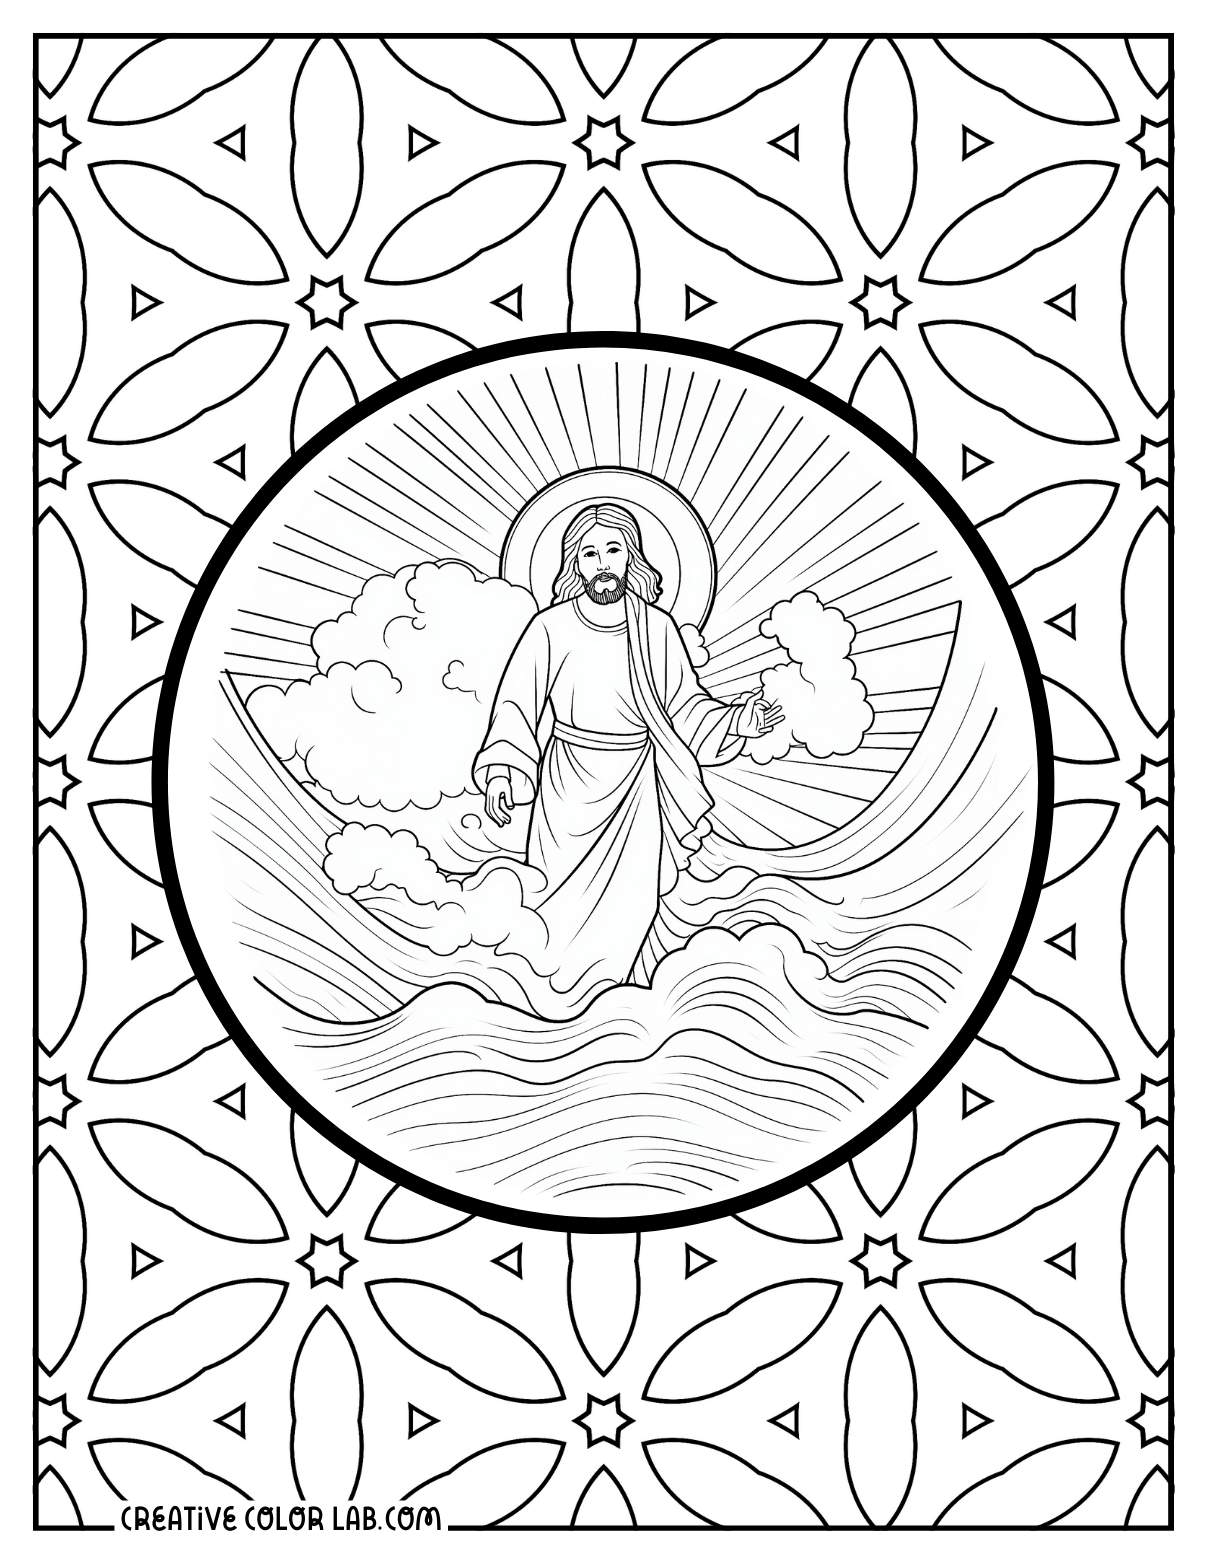 Detailed god save us from the storm mosaic coloring page for adults.